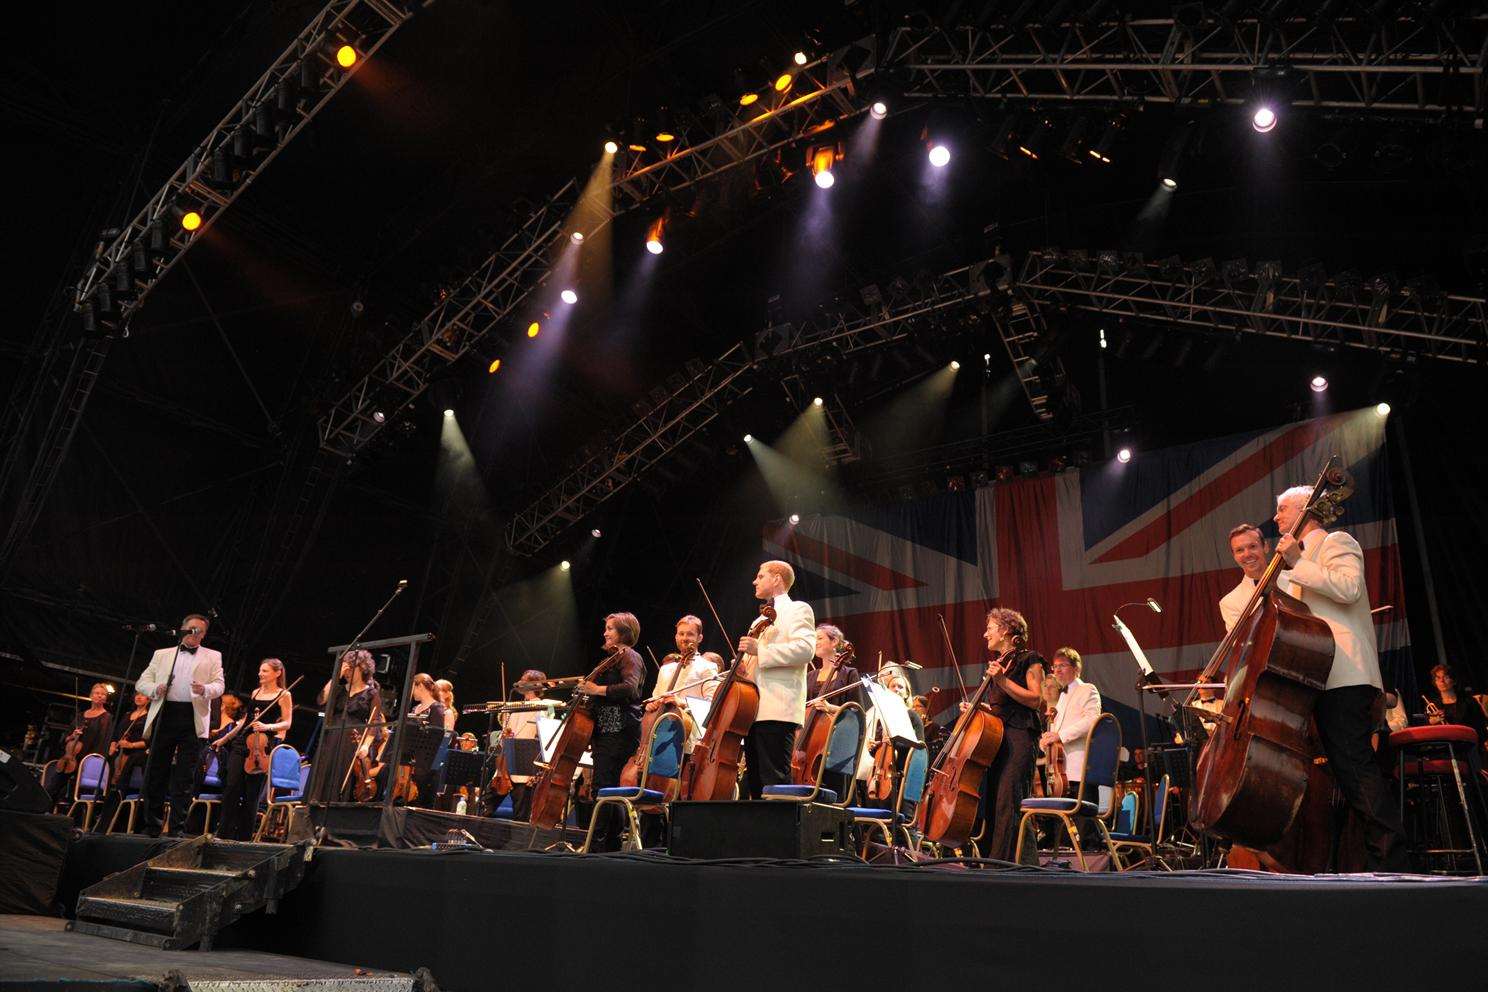 The Royal Philharmonic Concert Orchestra in action at the Castle Concerts